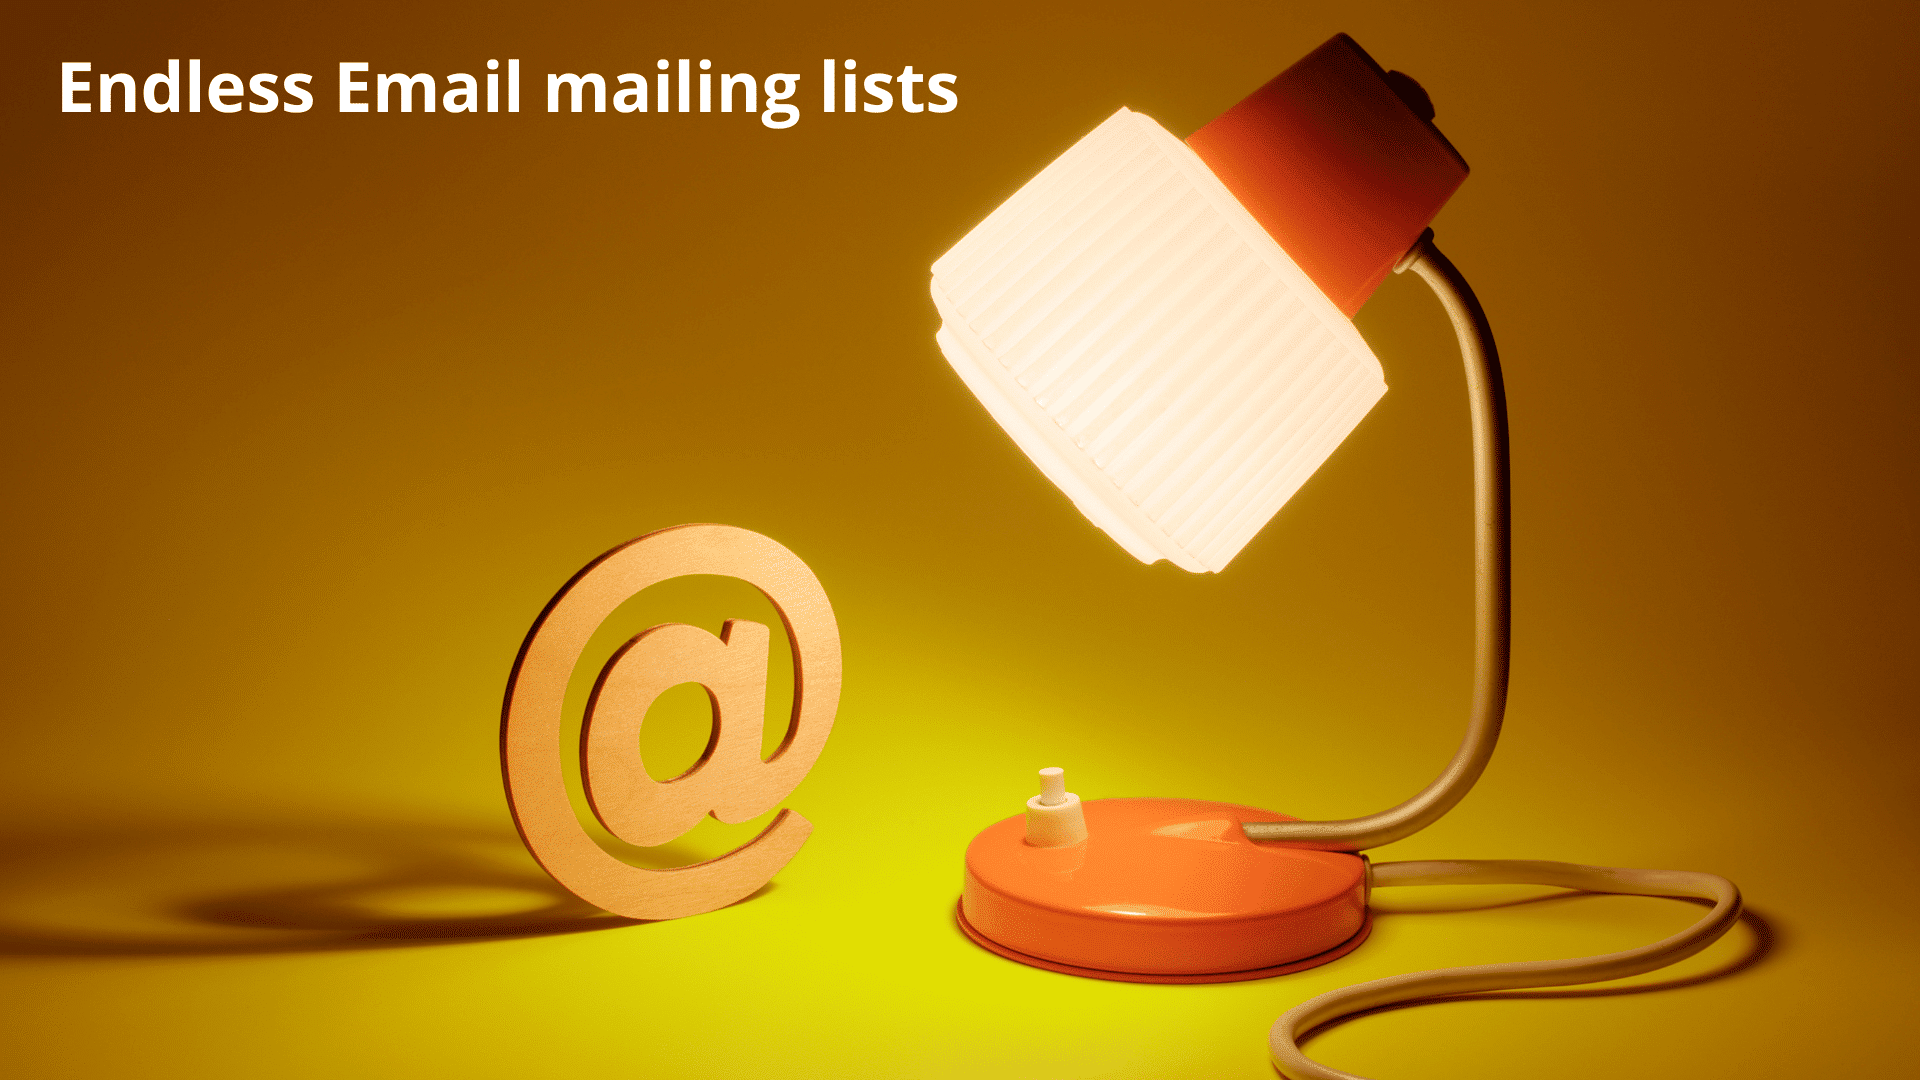 Endless Email mailing lists